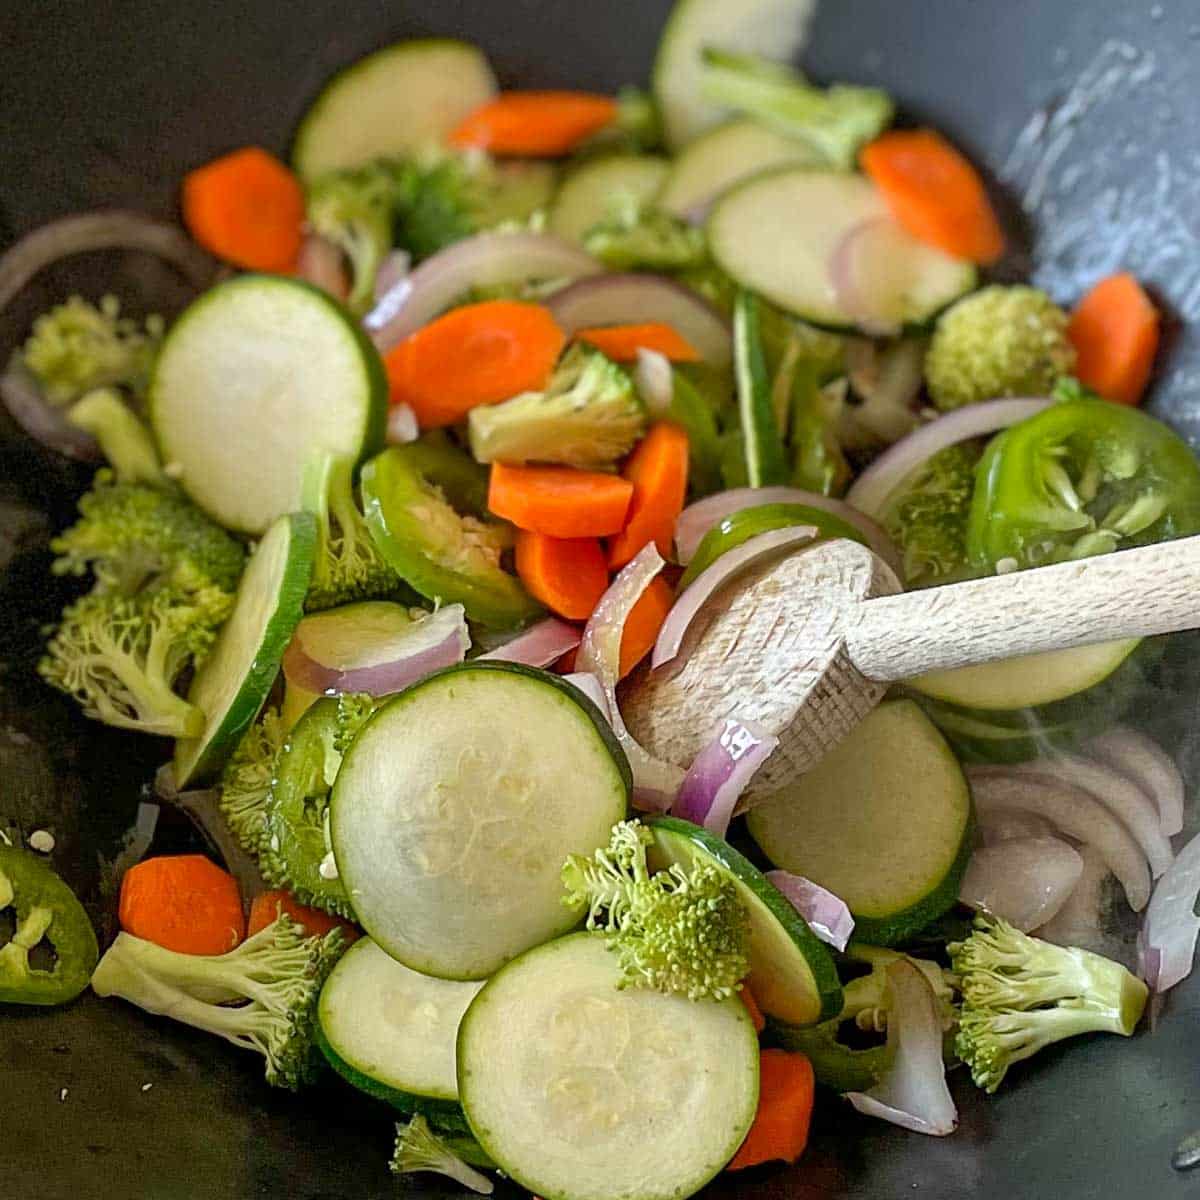 Zucchini, carrot, broccoli and jalapeño are added to the wok.